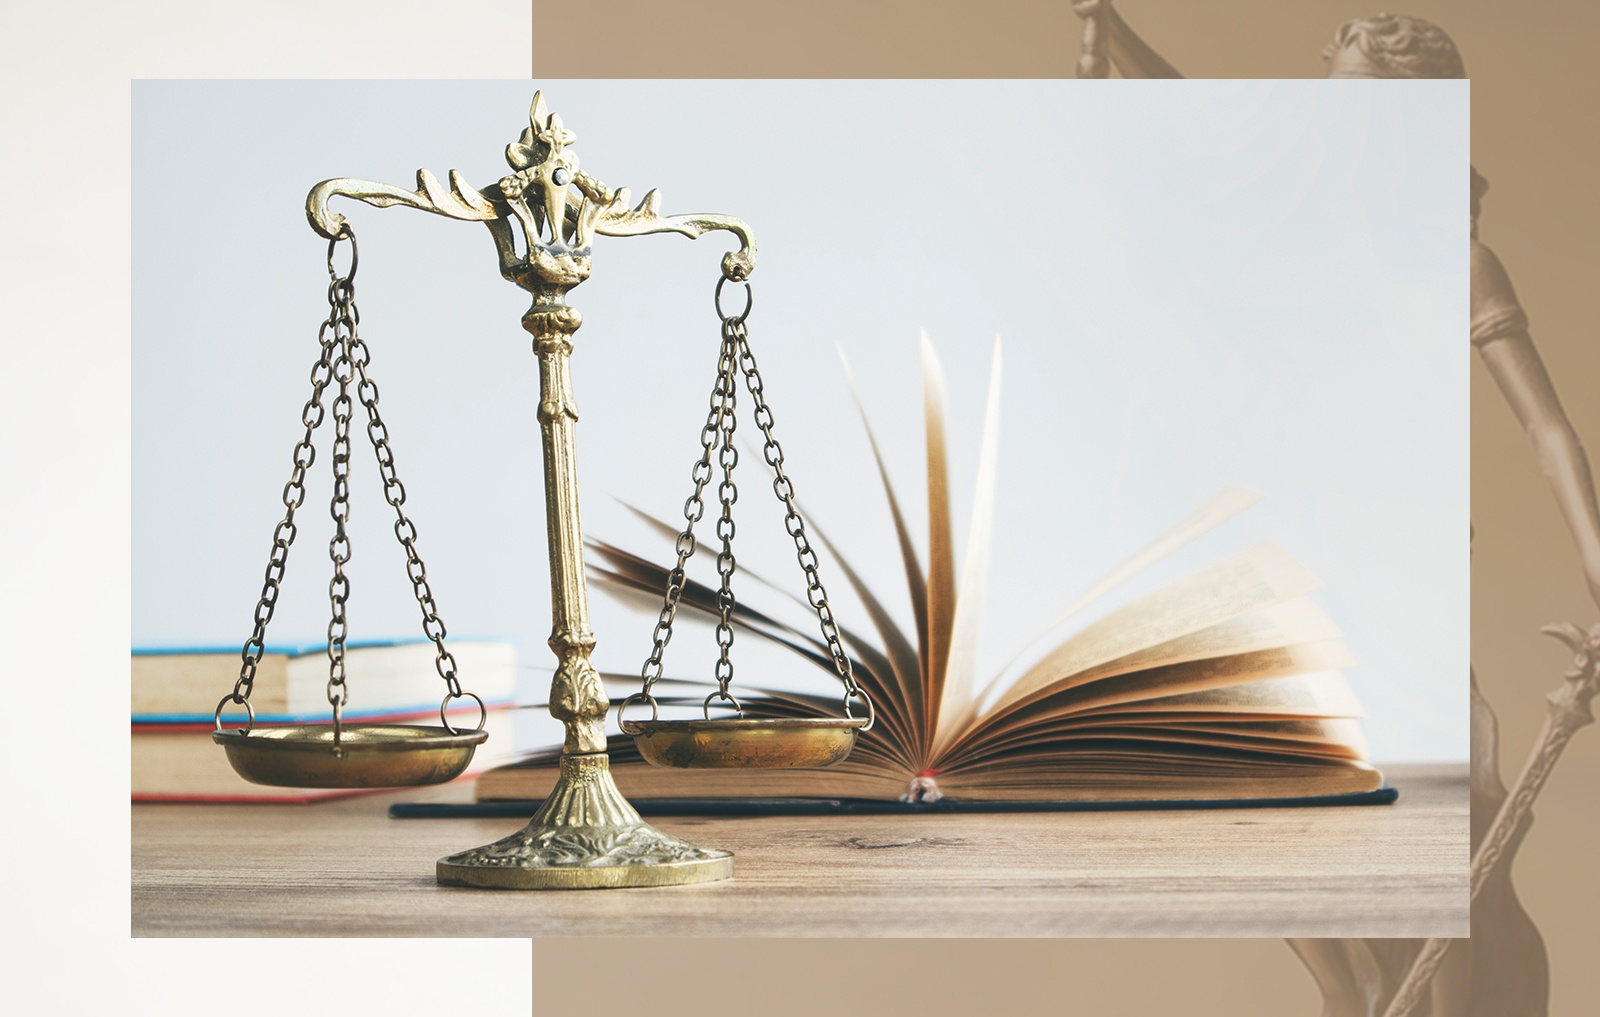 Let our experienced defence lawyers fight for you to beat your charges and avoid jail time.